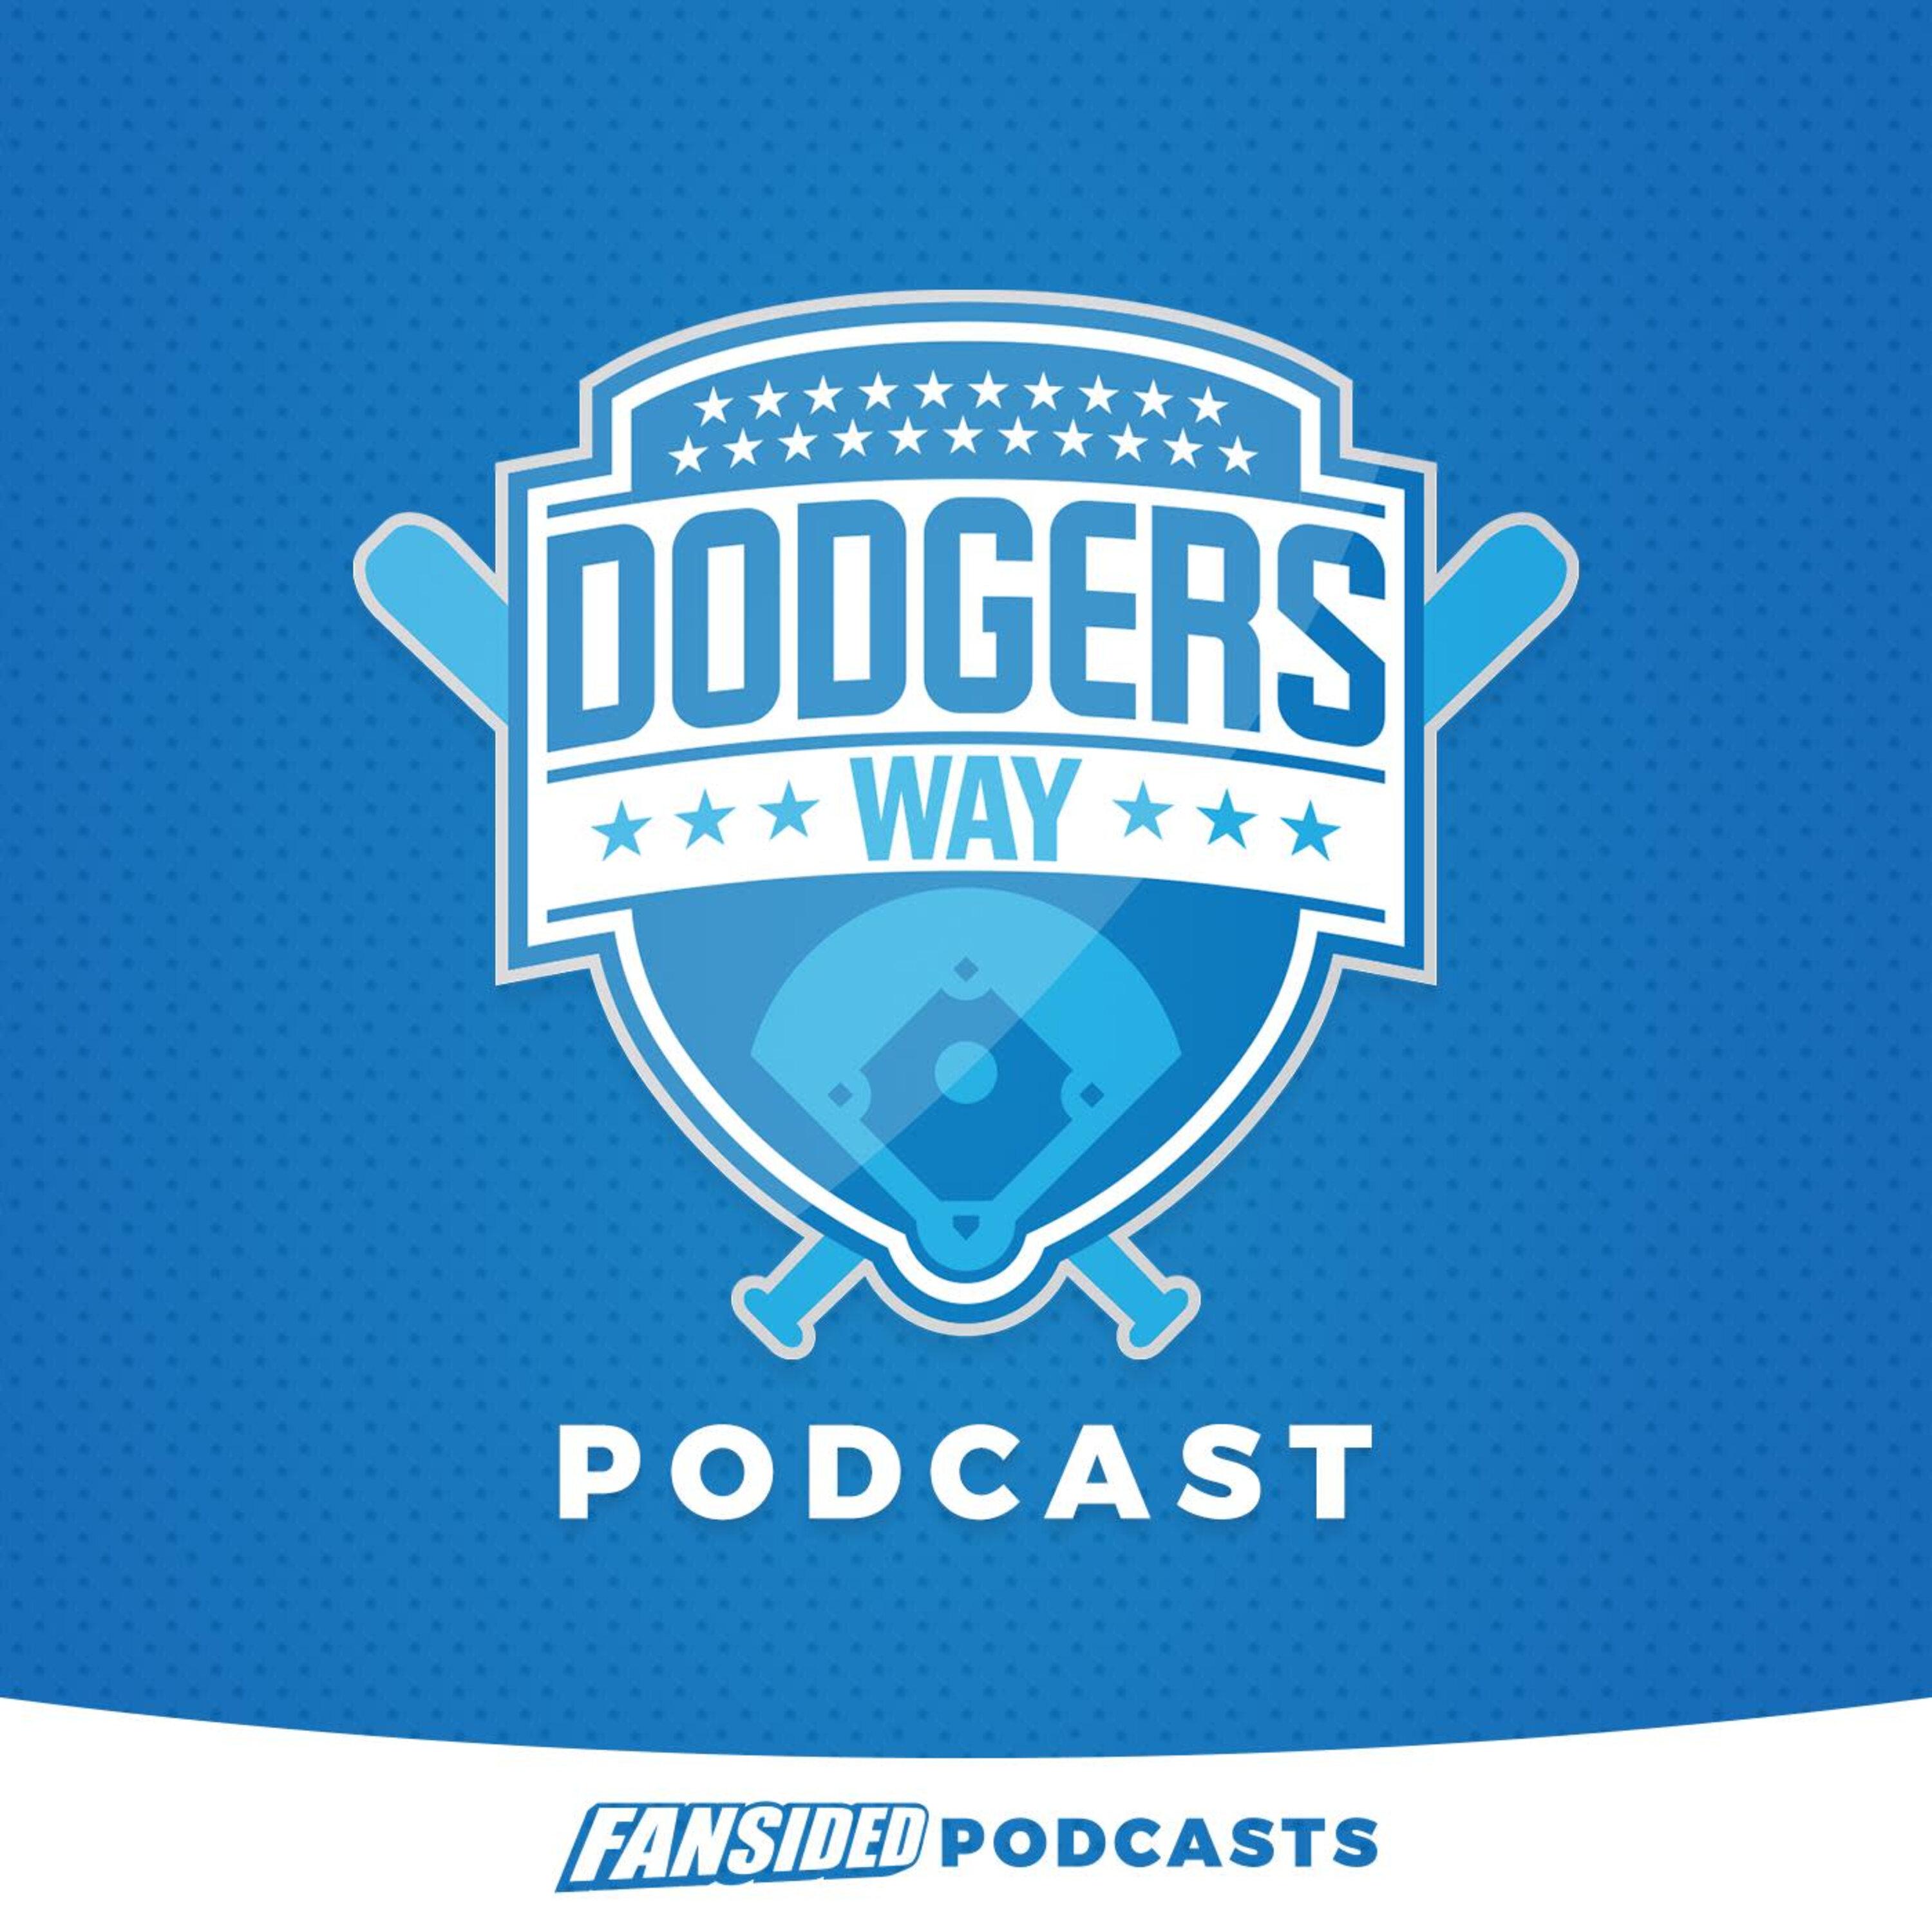 Dodgers Way Podcast on the LA Dodgers